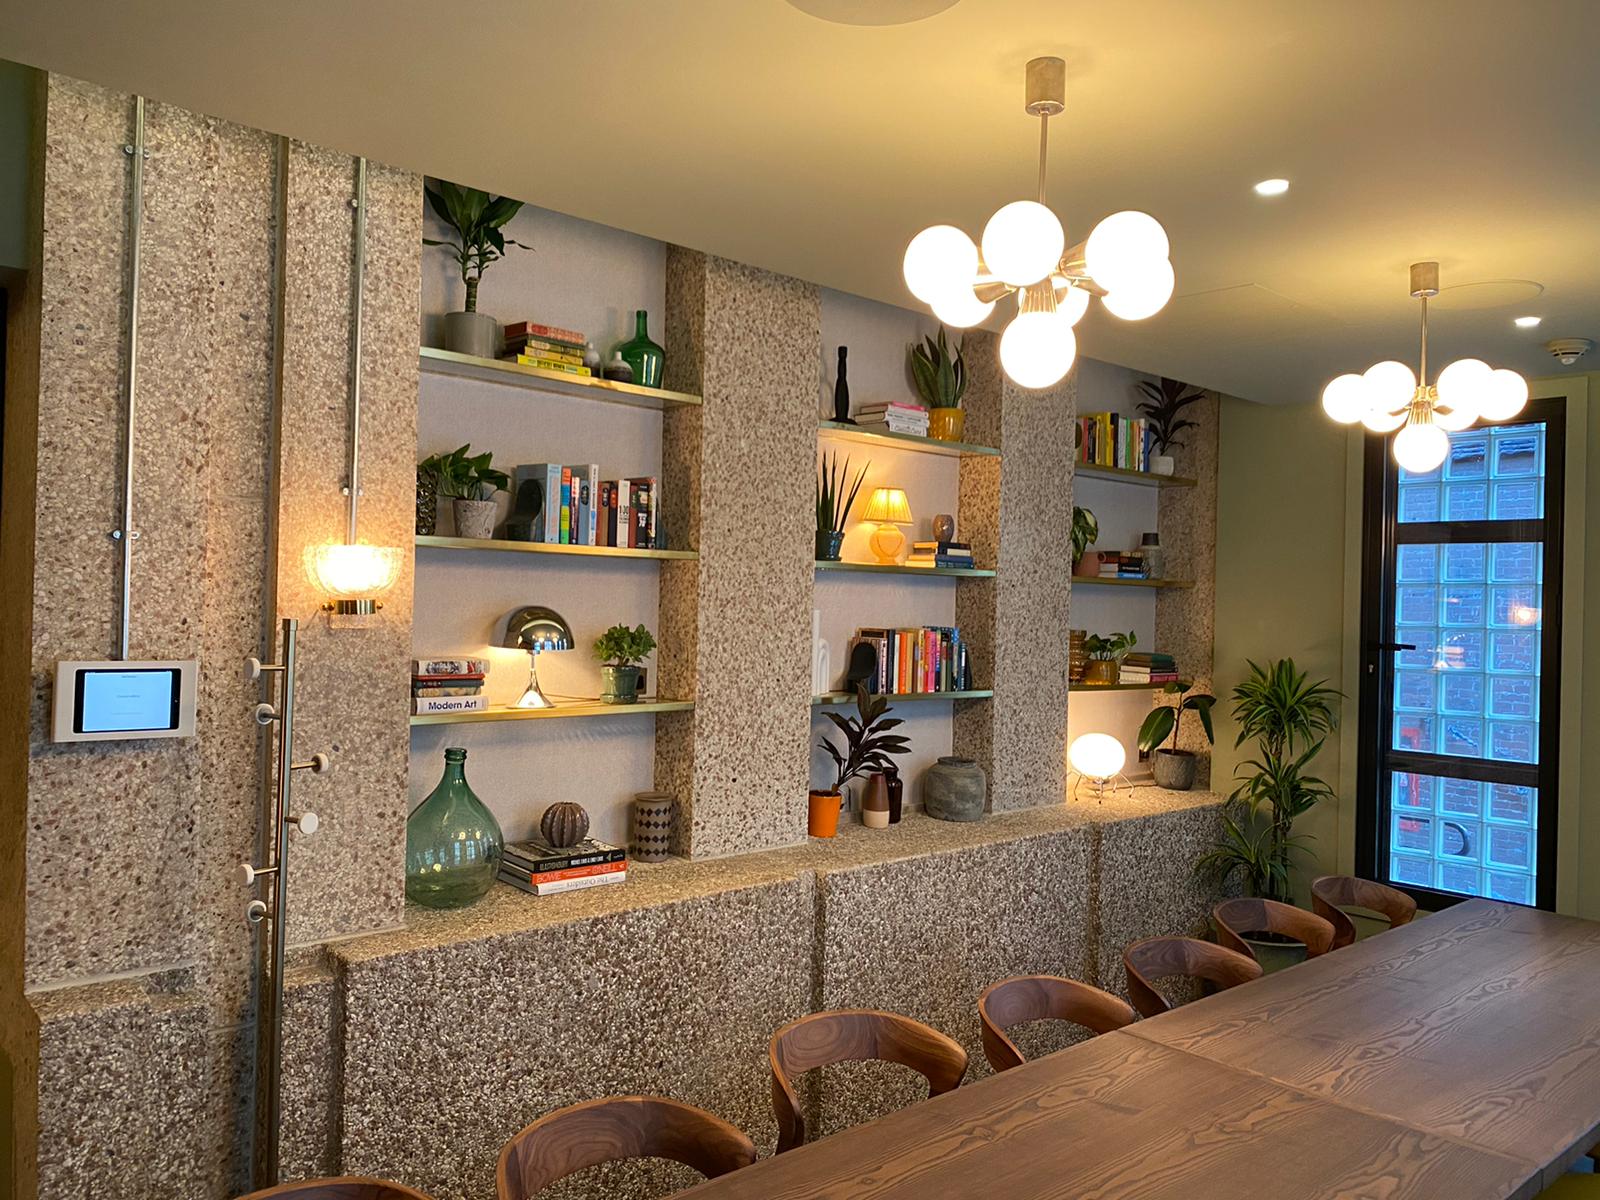 Smart lighting, heating and audio visual control in the Hoxton Hotel